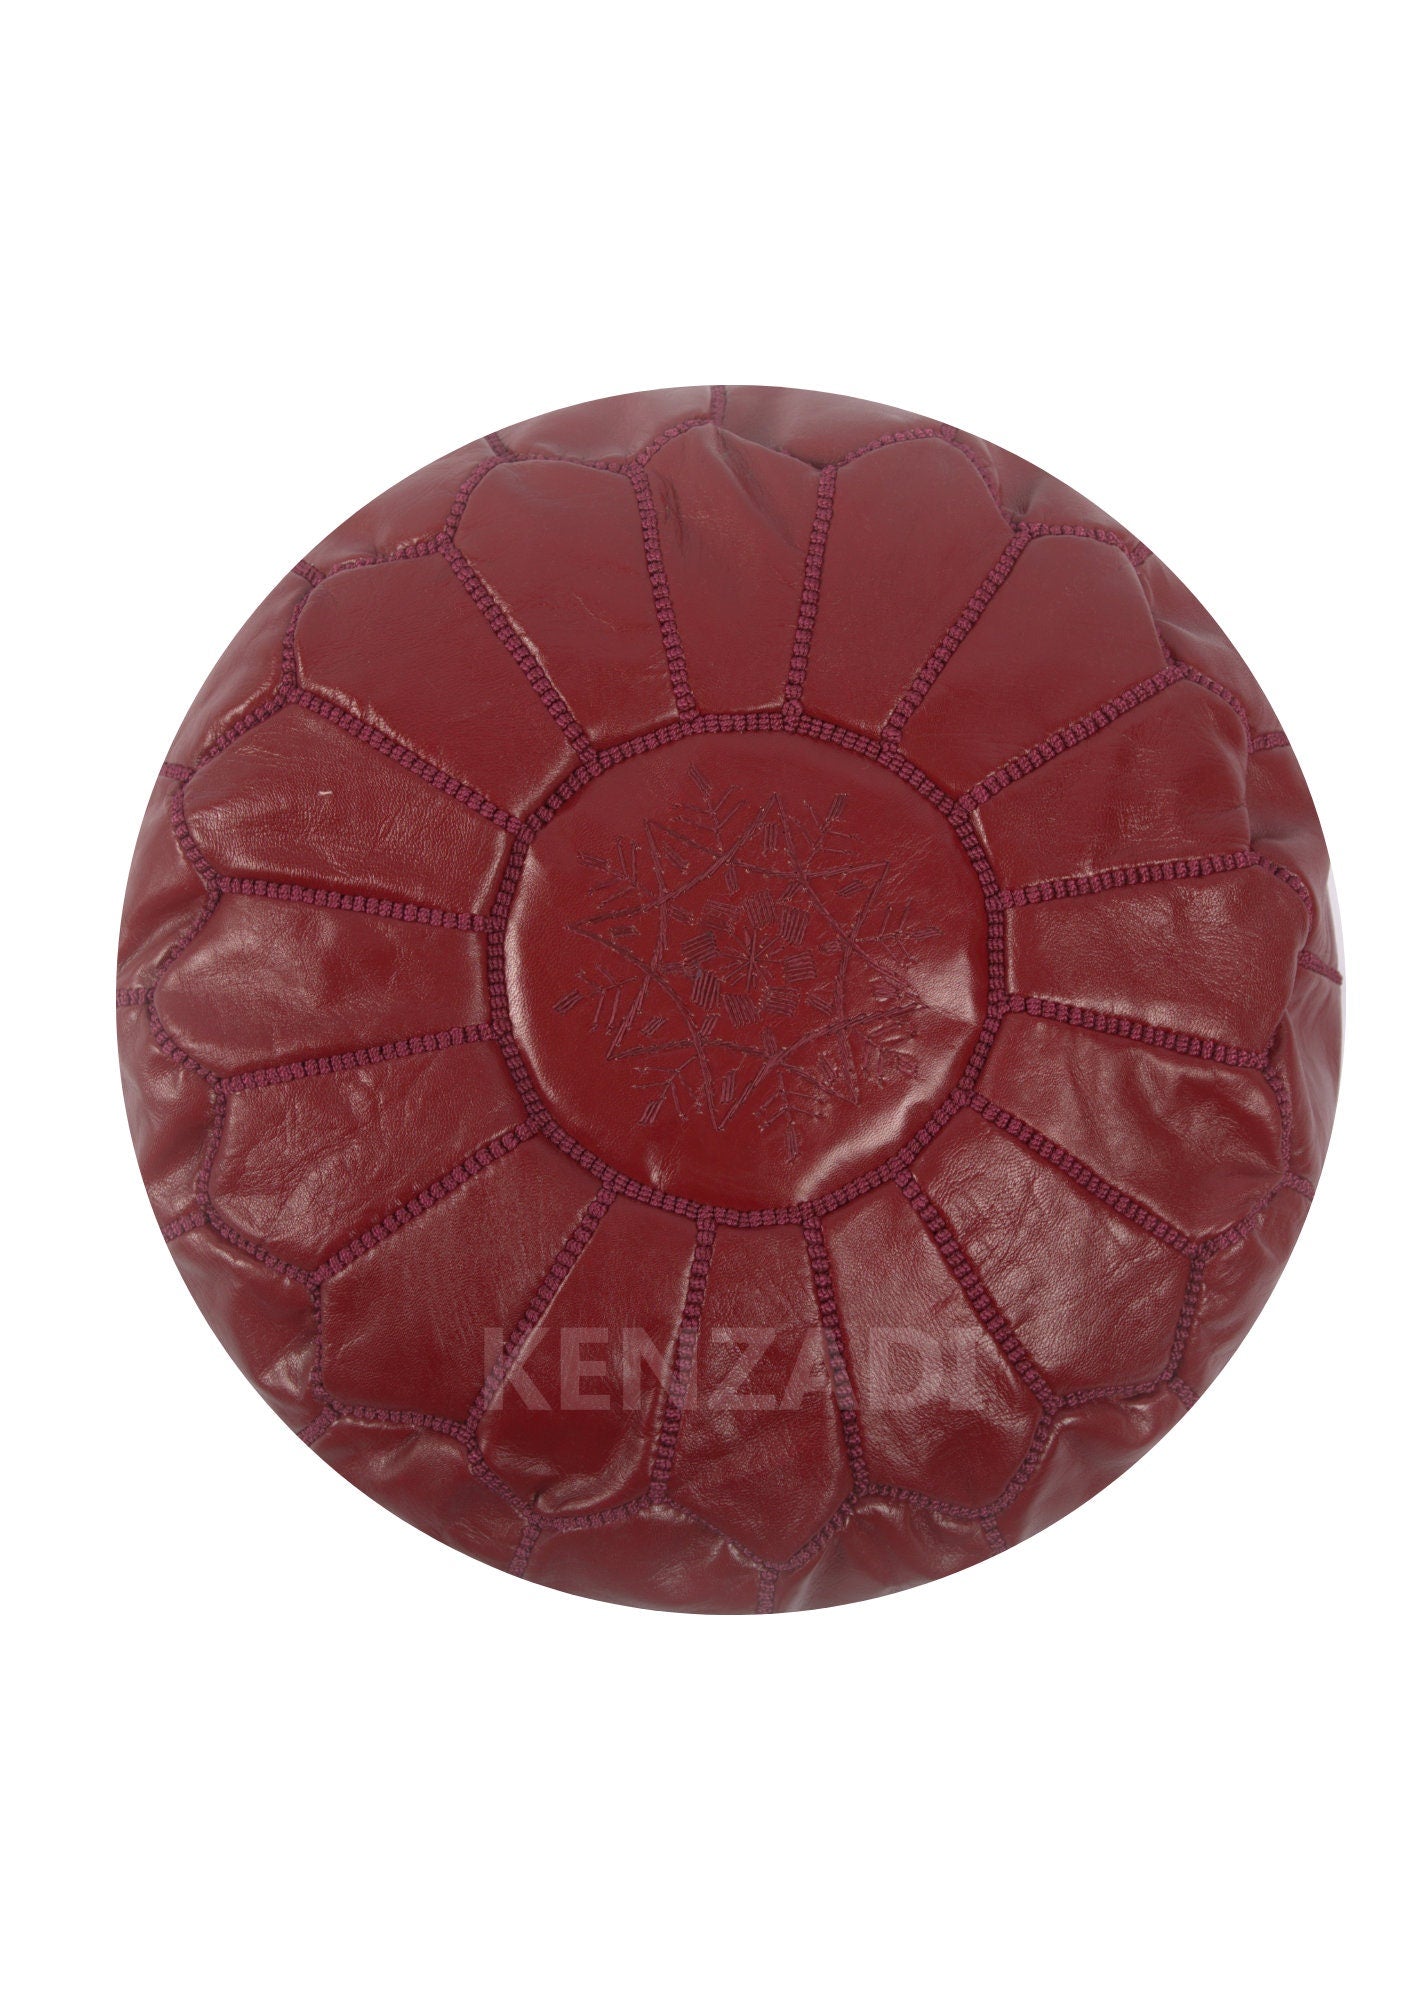 Authentic Moroccan leather pouf with garnet embroidery - Handmade, round, tan leather pouf - Perfect for adding a bohemian touch to your decor - Use as a footrest, pouf, or coffee table